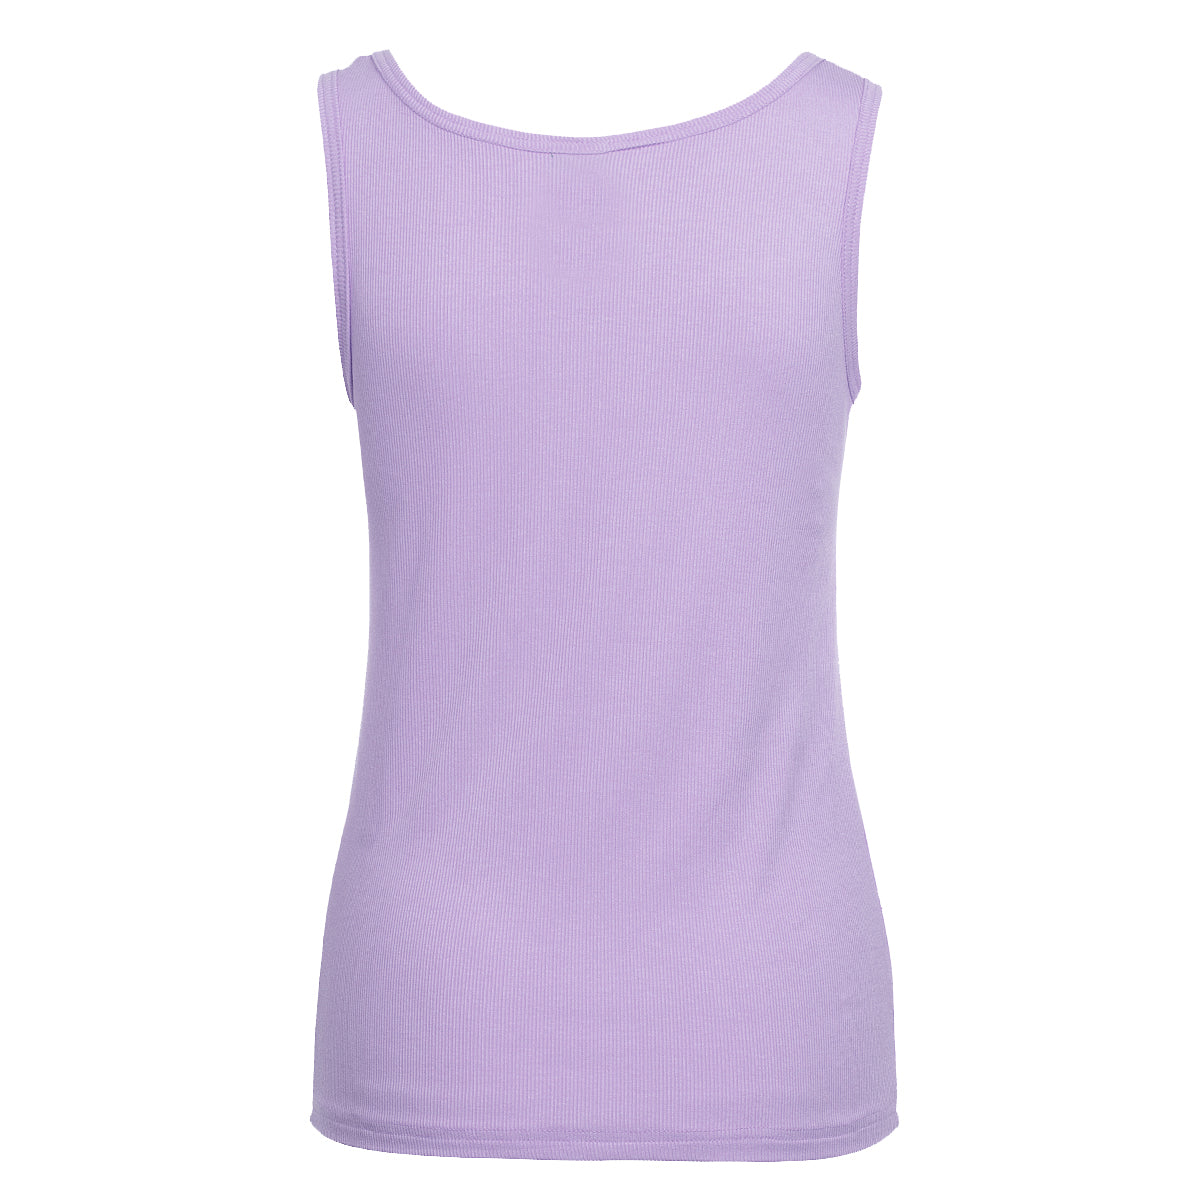 LUXZUZ // ONE TWO Adelina Top Top 407 Lilacs Bloom